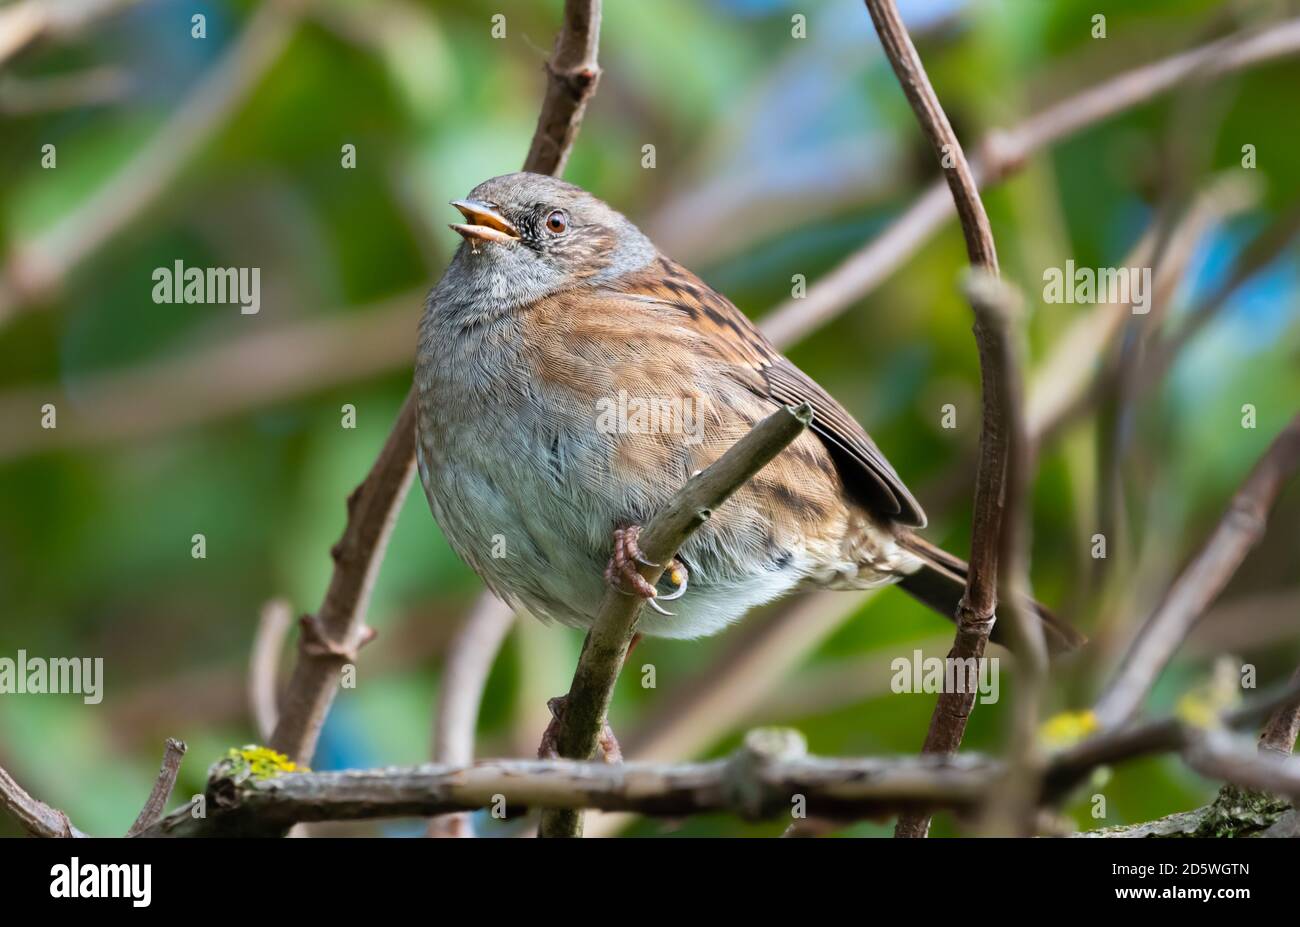 Adult Dunnock bird (Prunella modularis), a small passerine or perching bird, perching on a tree branch in Autumn in West Sussex, England, UK. Stock Photo